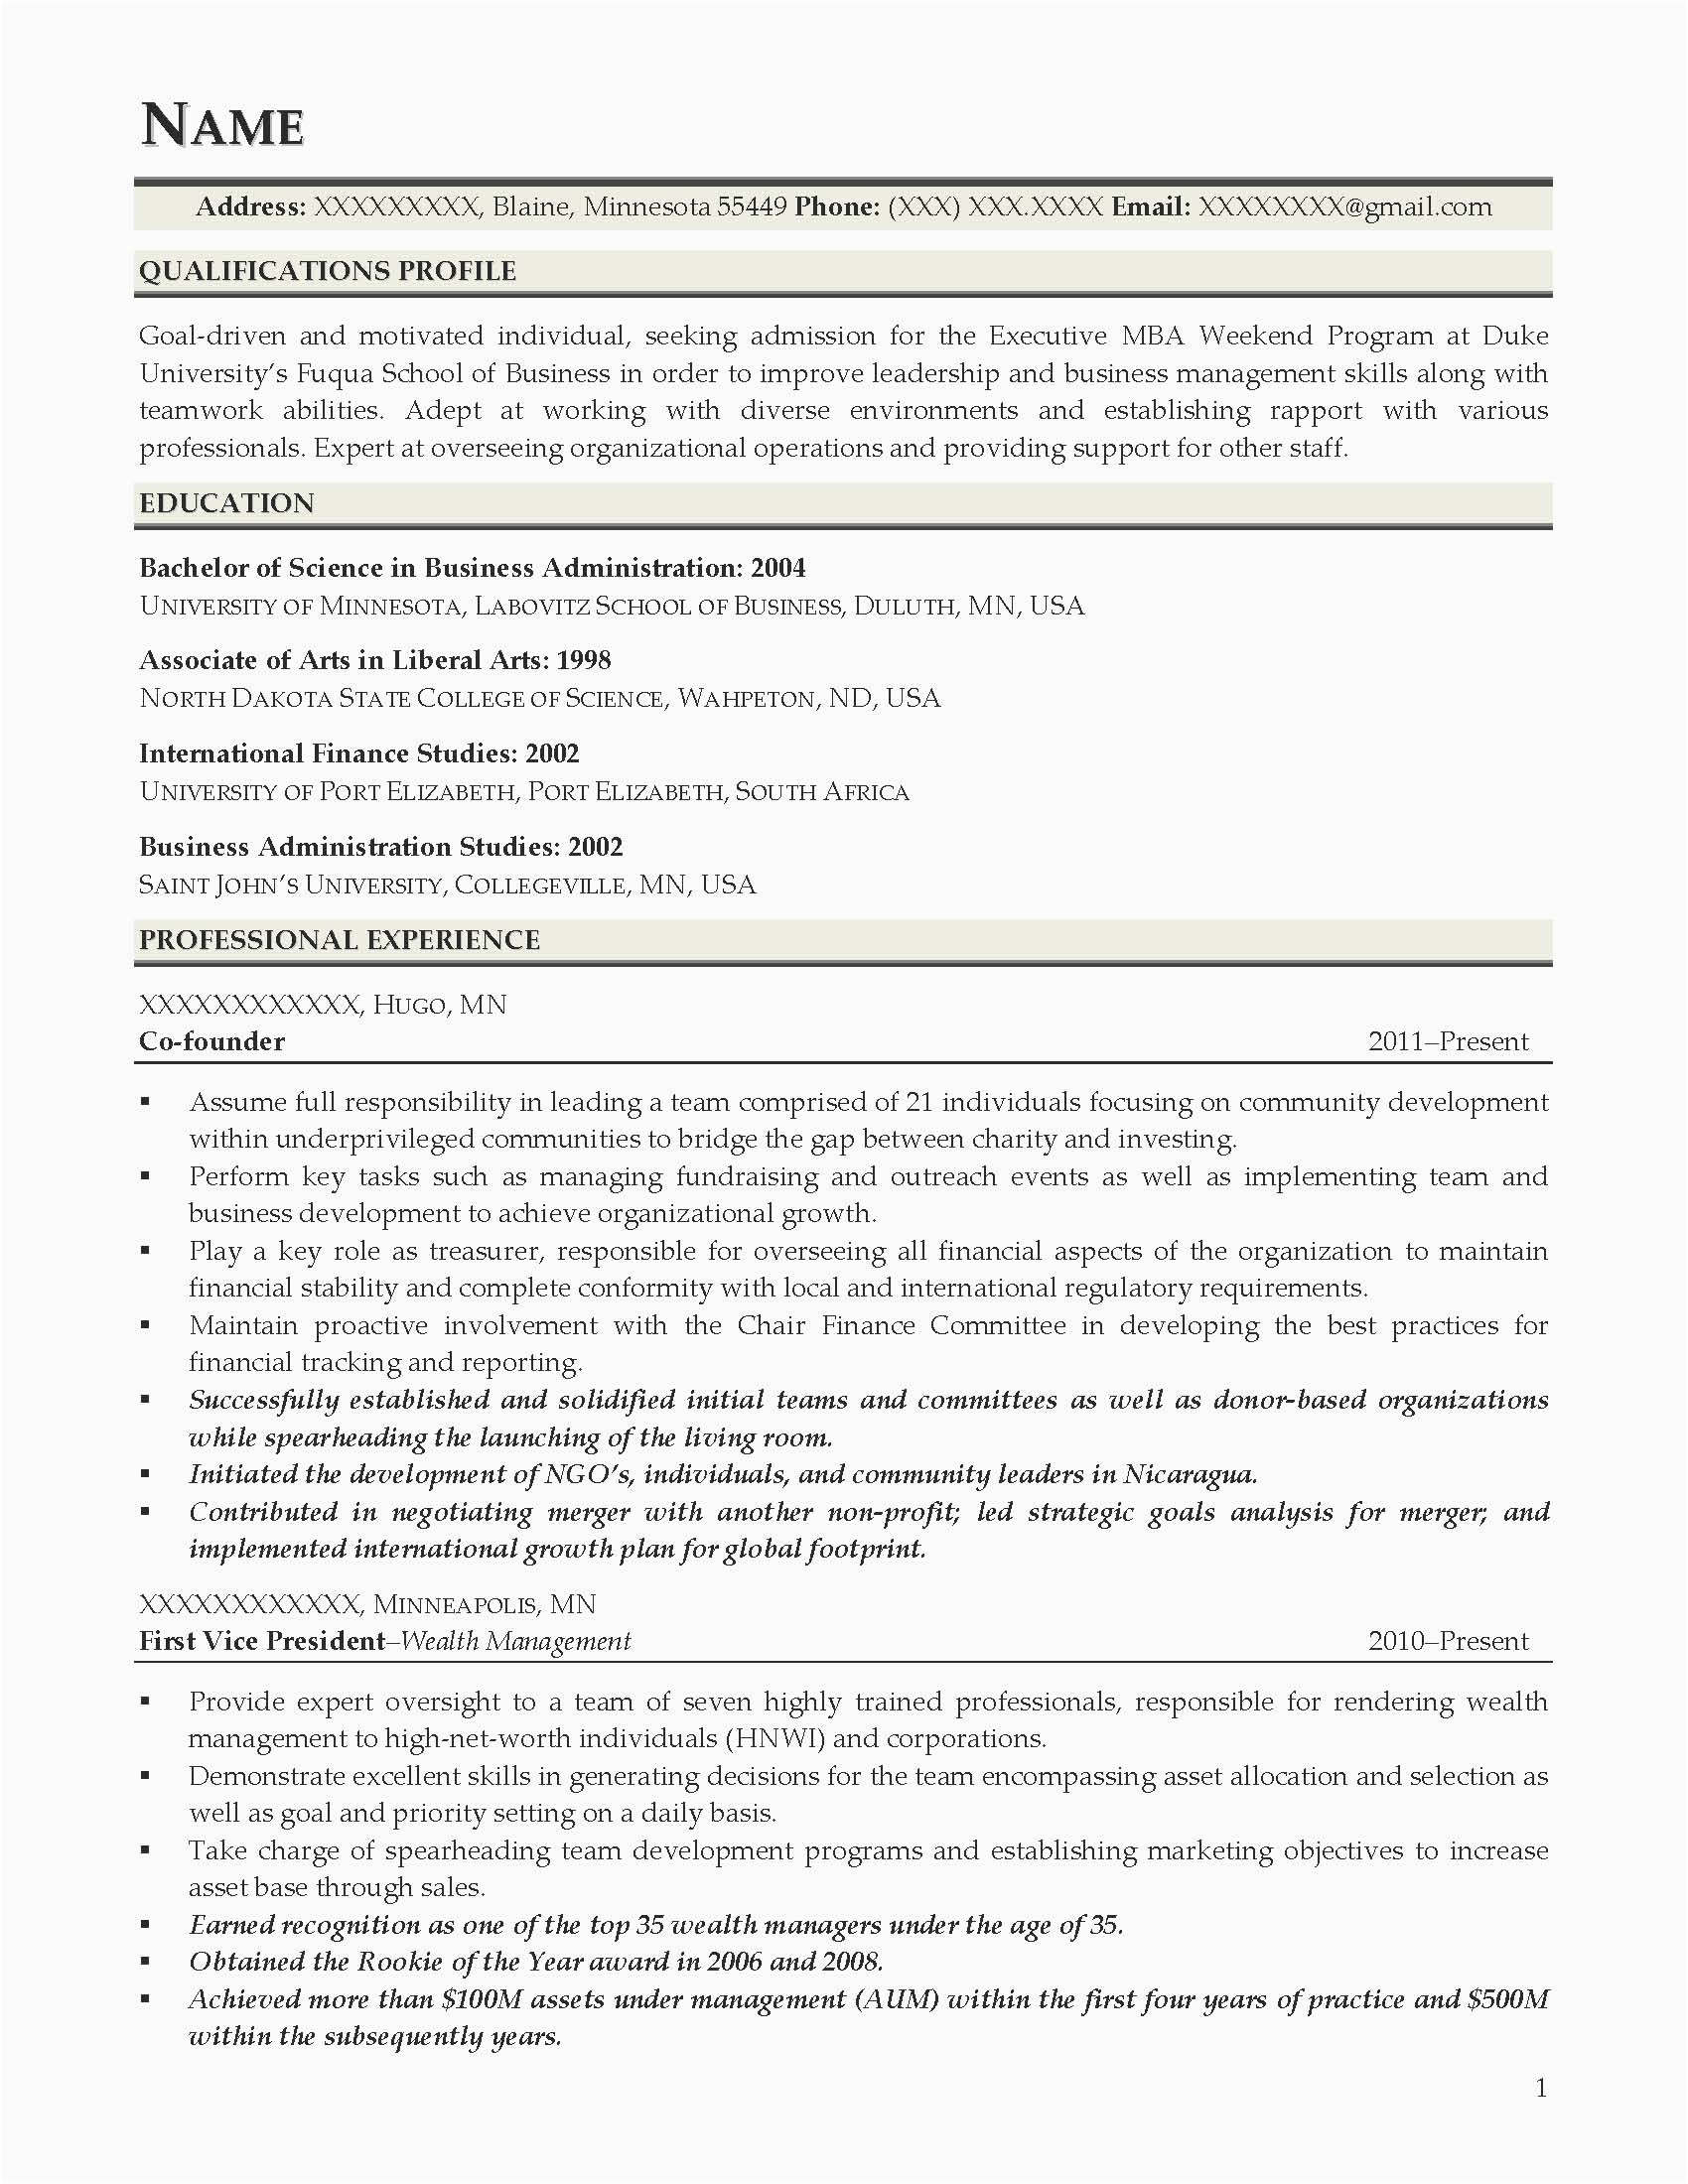 Sample Resume for Executive Mba Application Good Resume Examples for All Careers